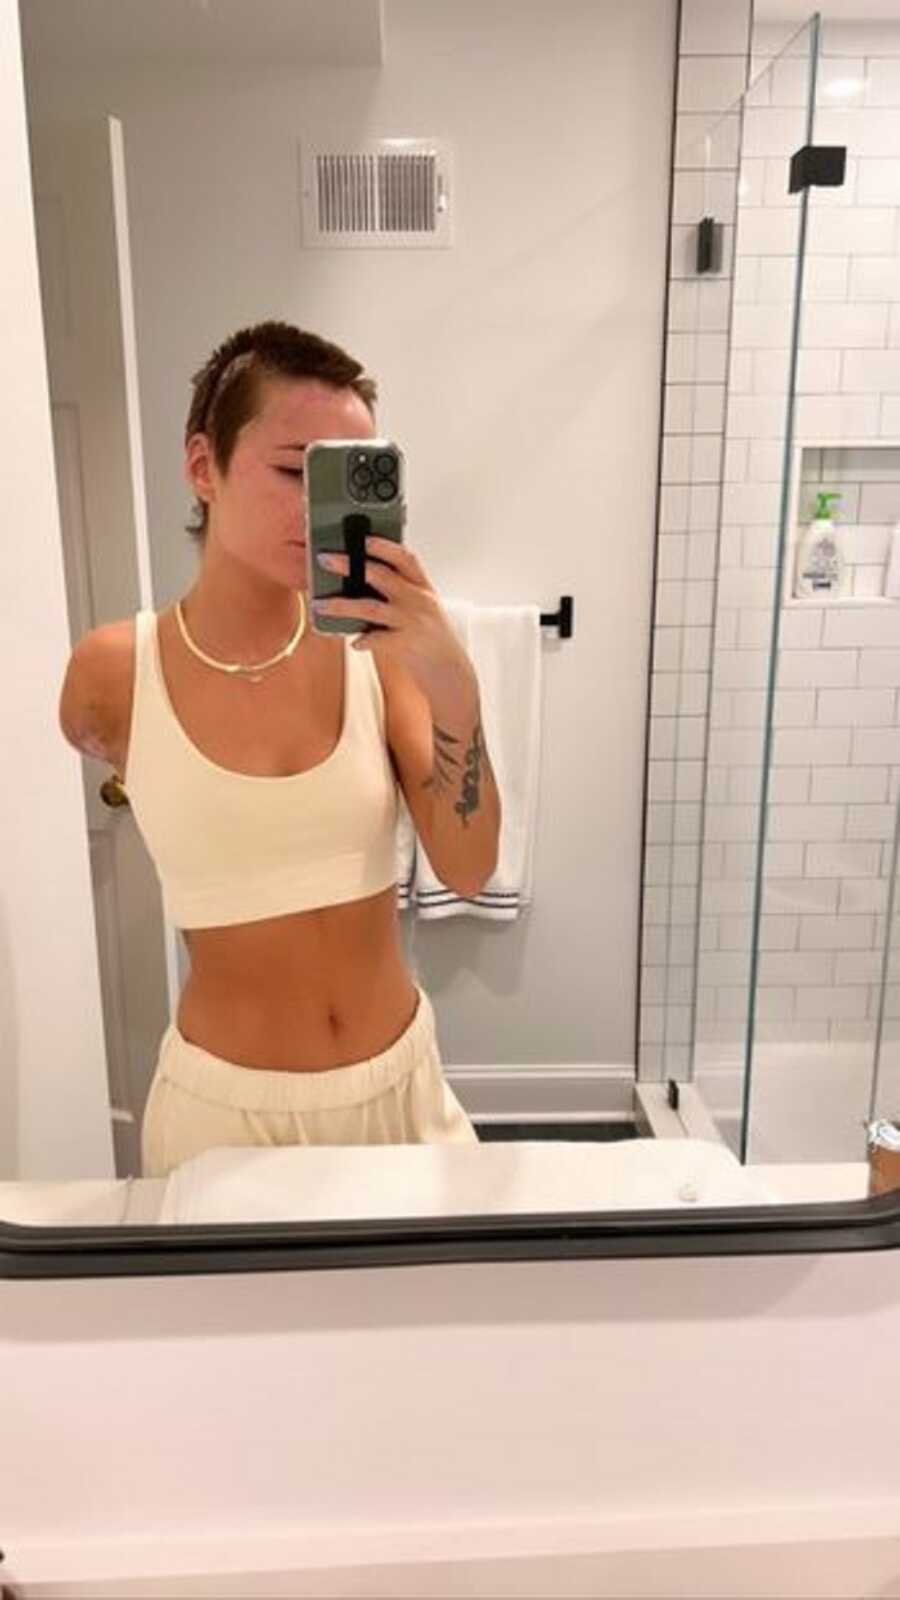 Woman takes a selfie of her amputated arm in the bathroom mirror.